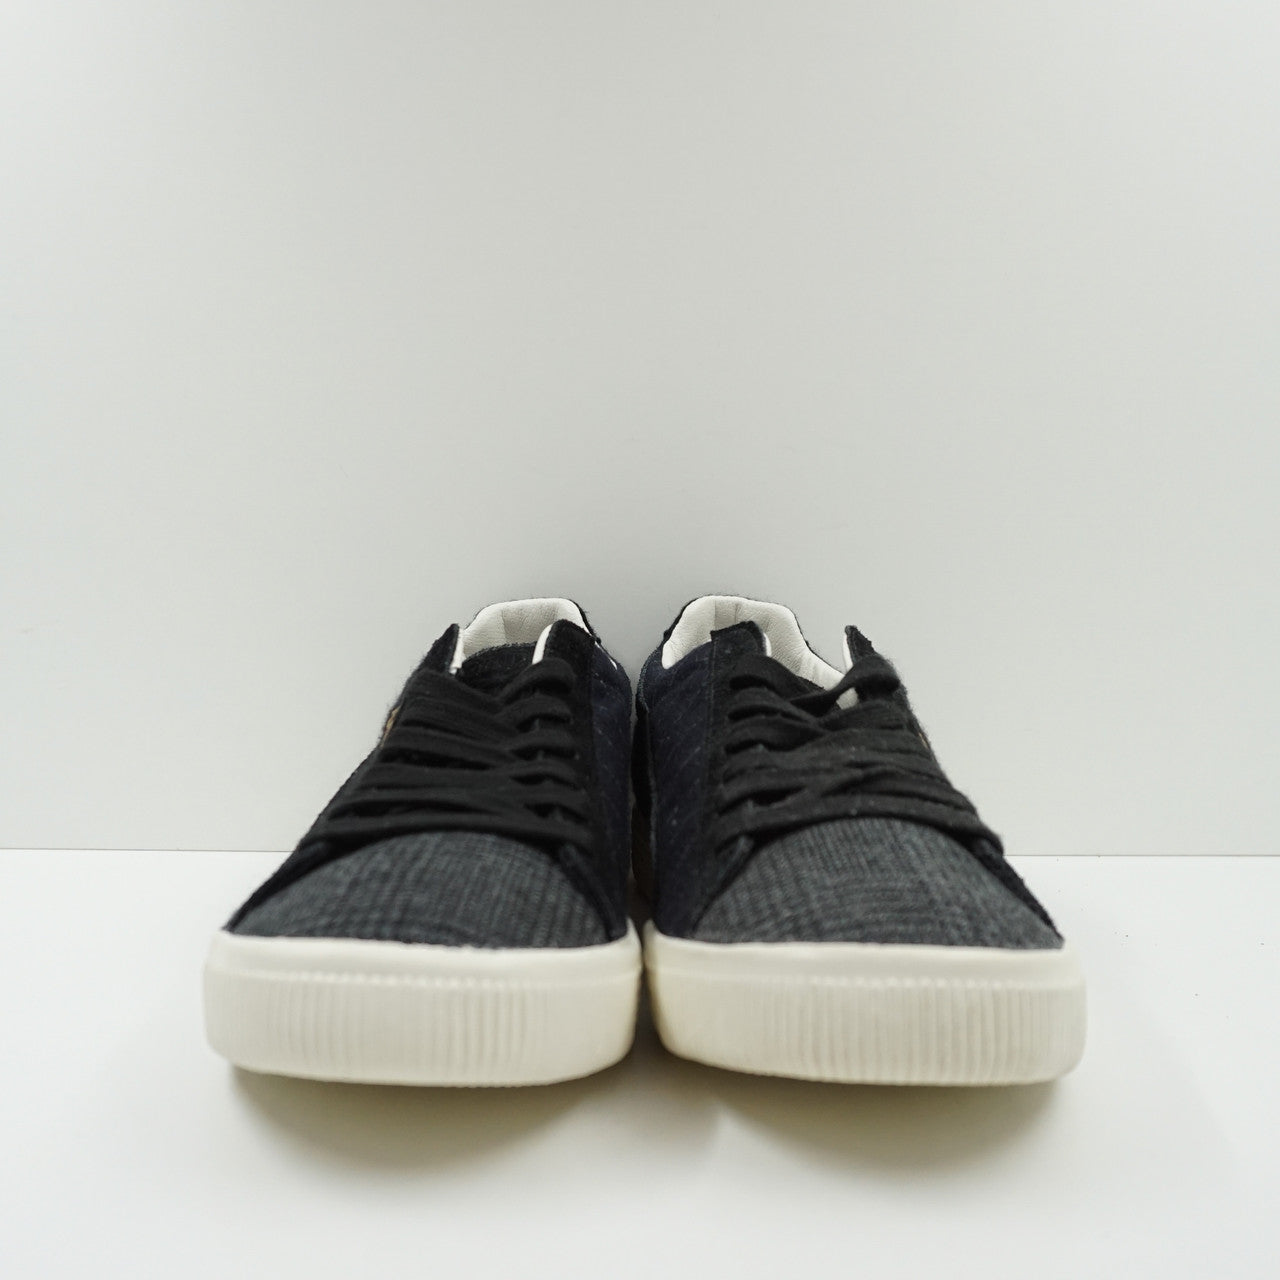 Puma Clyde for United Arrows & Sons